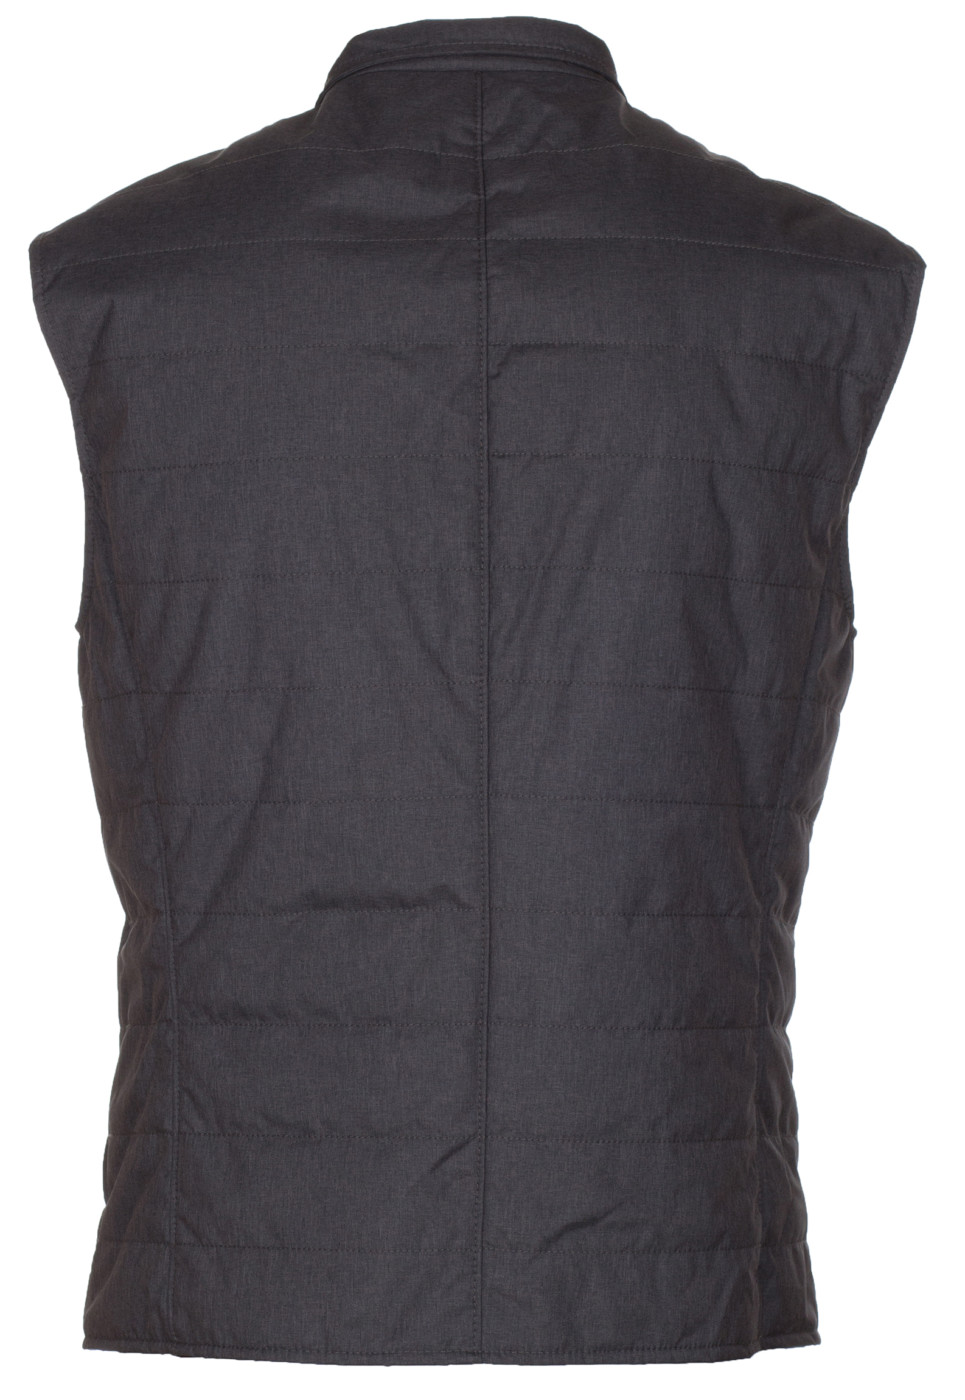 woocommerce-673321-2209615.cloudwaysapps.com-the-mens-store-mens-gray-quilted-padded-vest